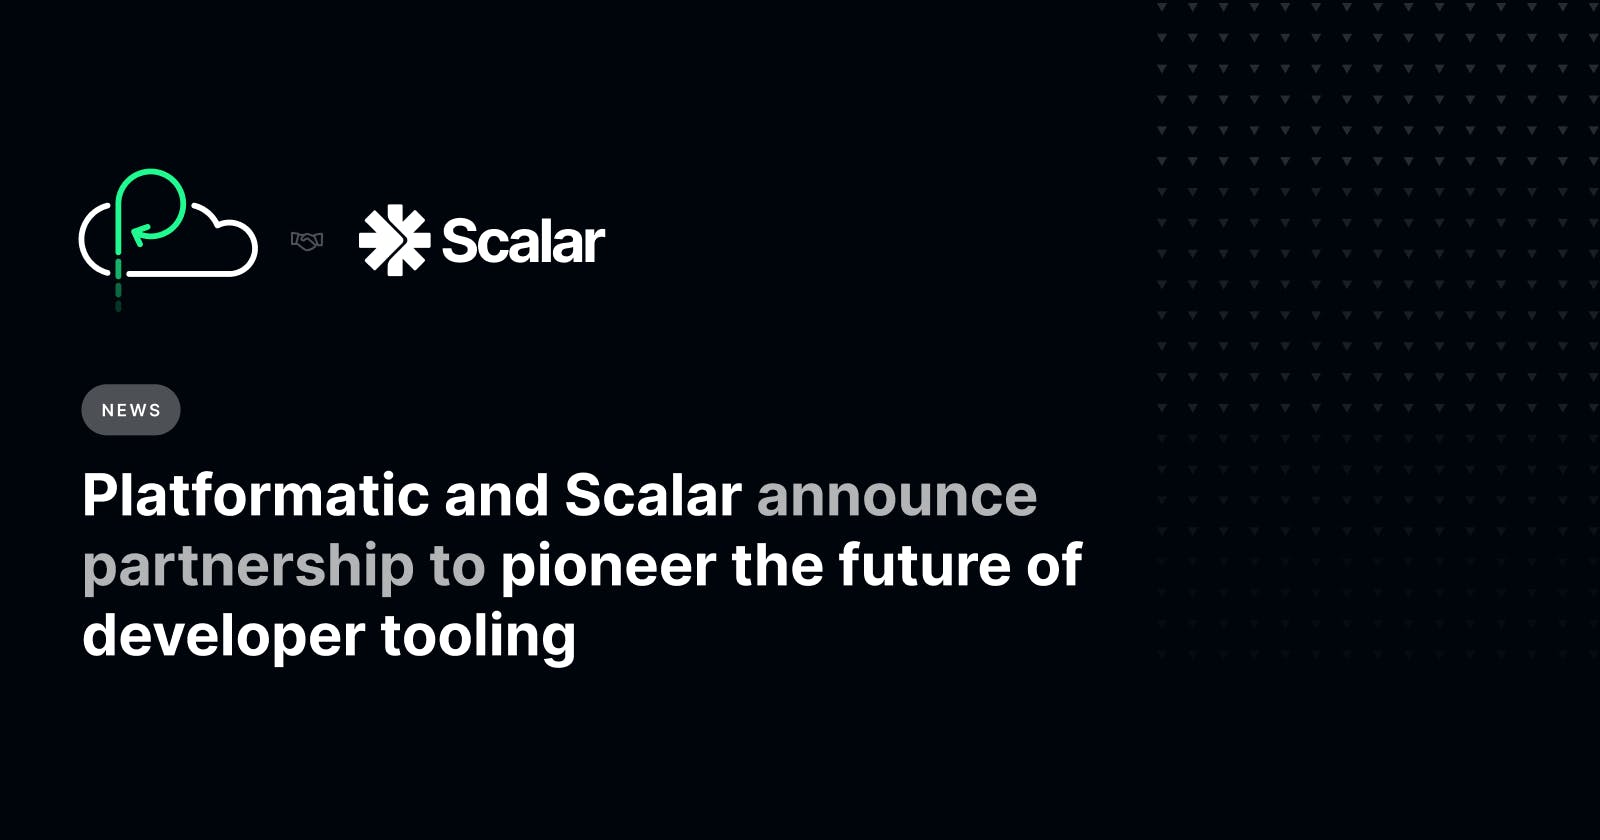 Platformatic and Scalar Announce Partnership, Pioneering the Future of Developer Tooling